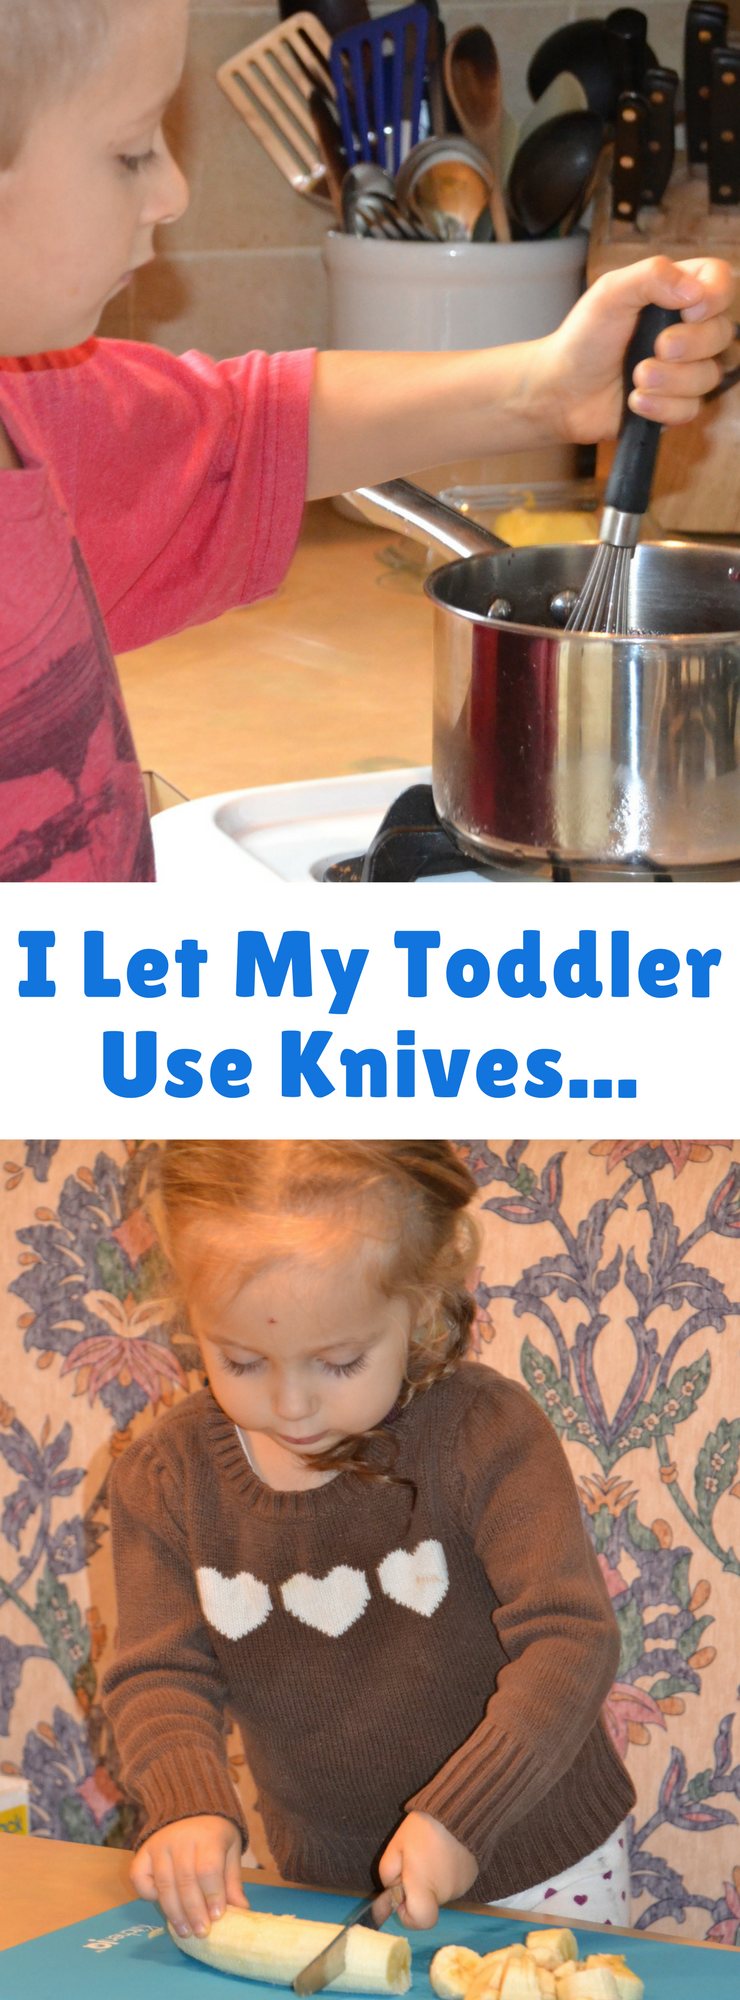 Sometimes it seems like more of a hassle than it's worth to get your kids in the kitchen. But that work will pay off, especially if you start early. That's why I let my toddler use knives!